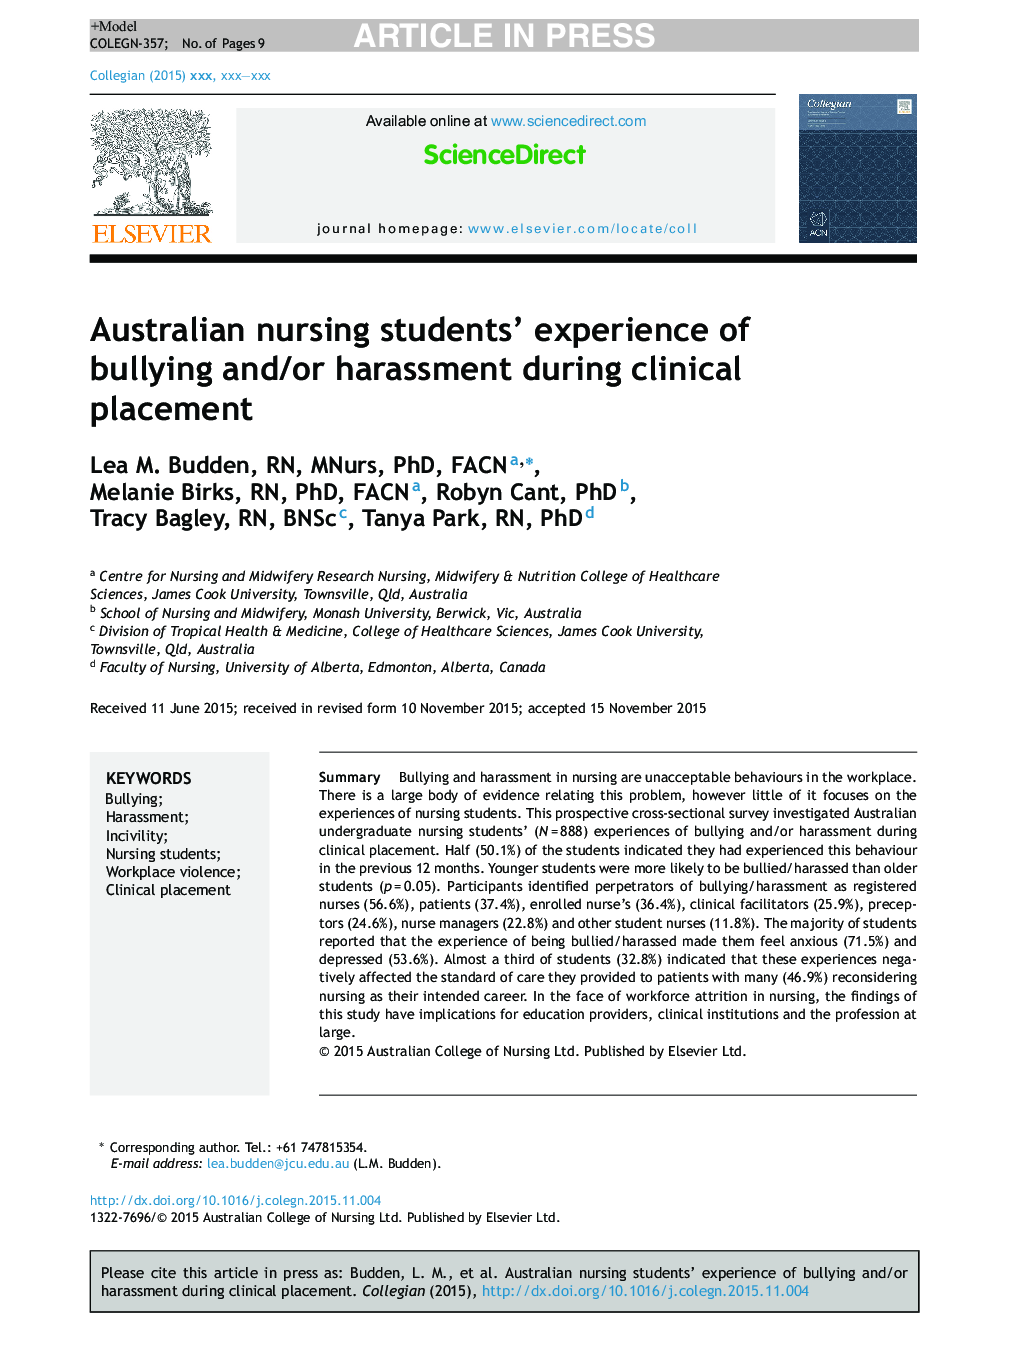 Australian nursing students' experience of bullying and/or harassment during clinical placement